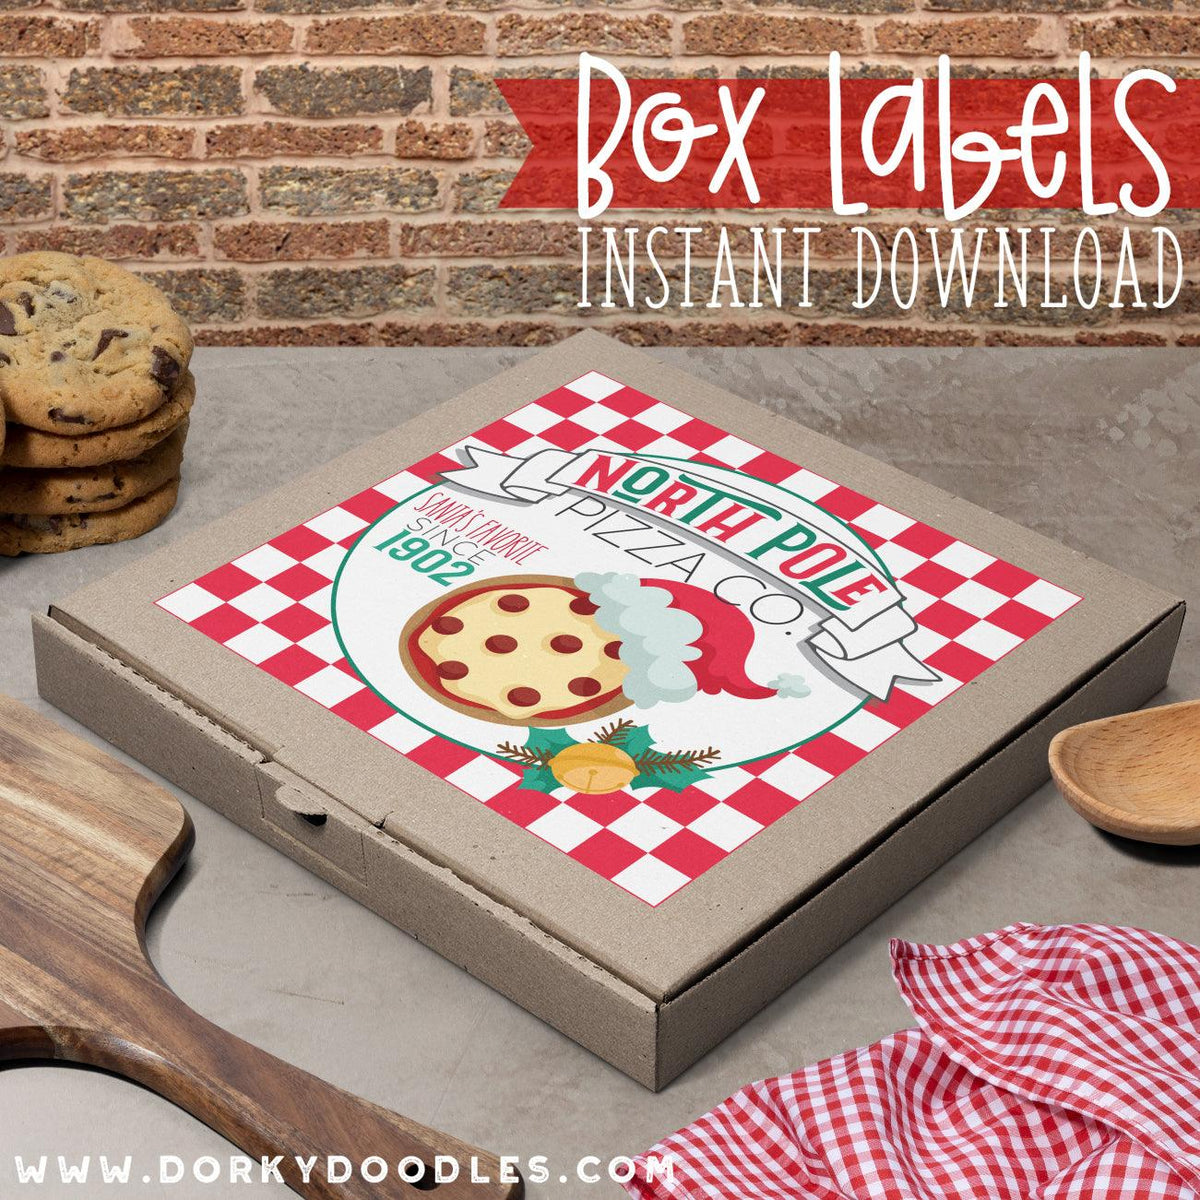 ENJOY YOUR PIZZA - generic printed pizza box